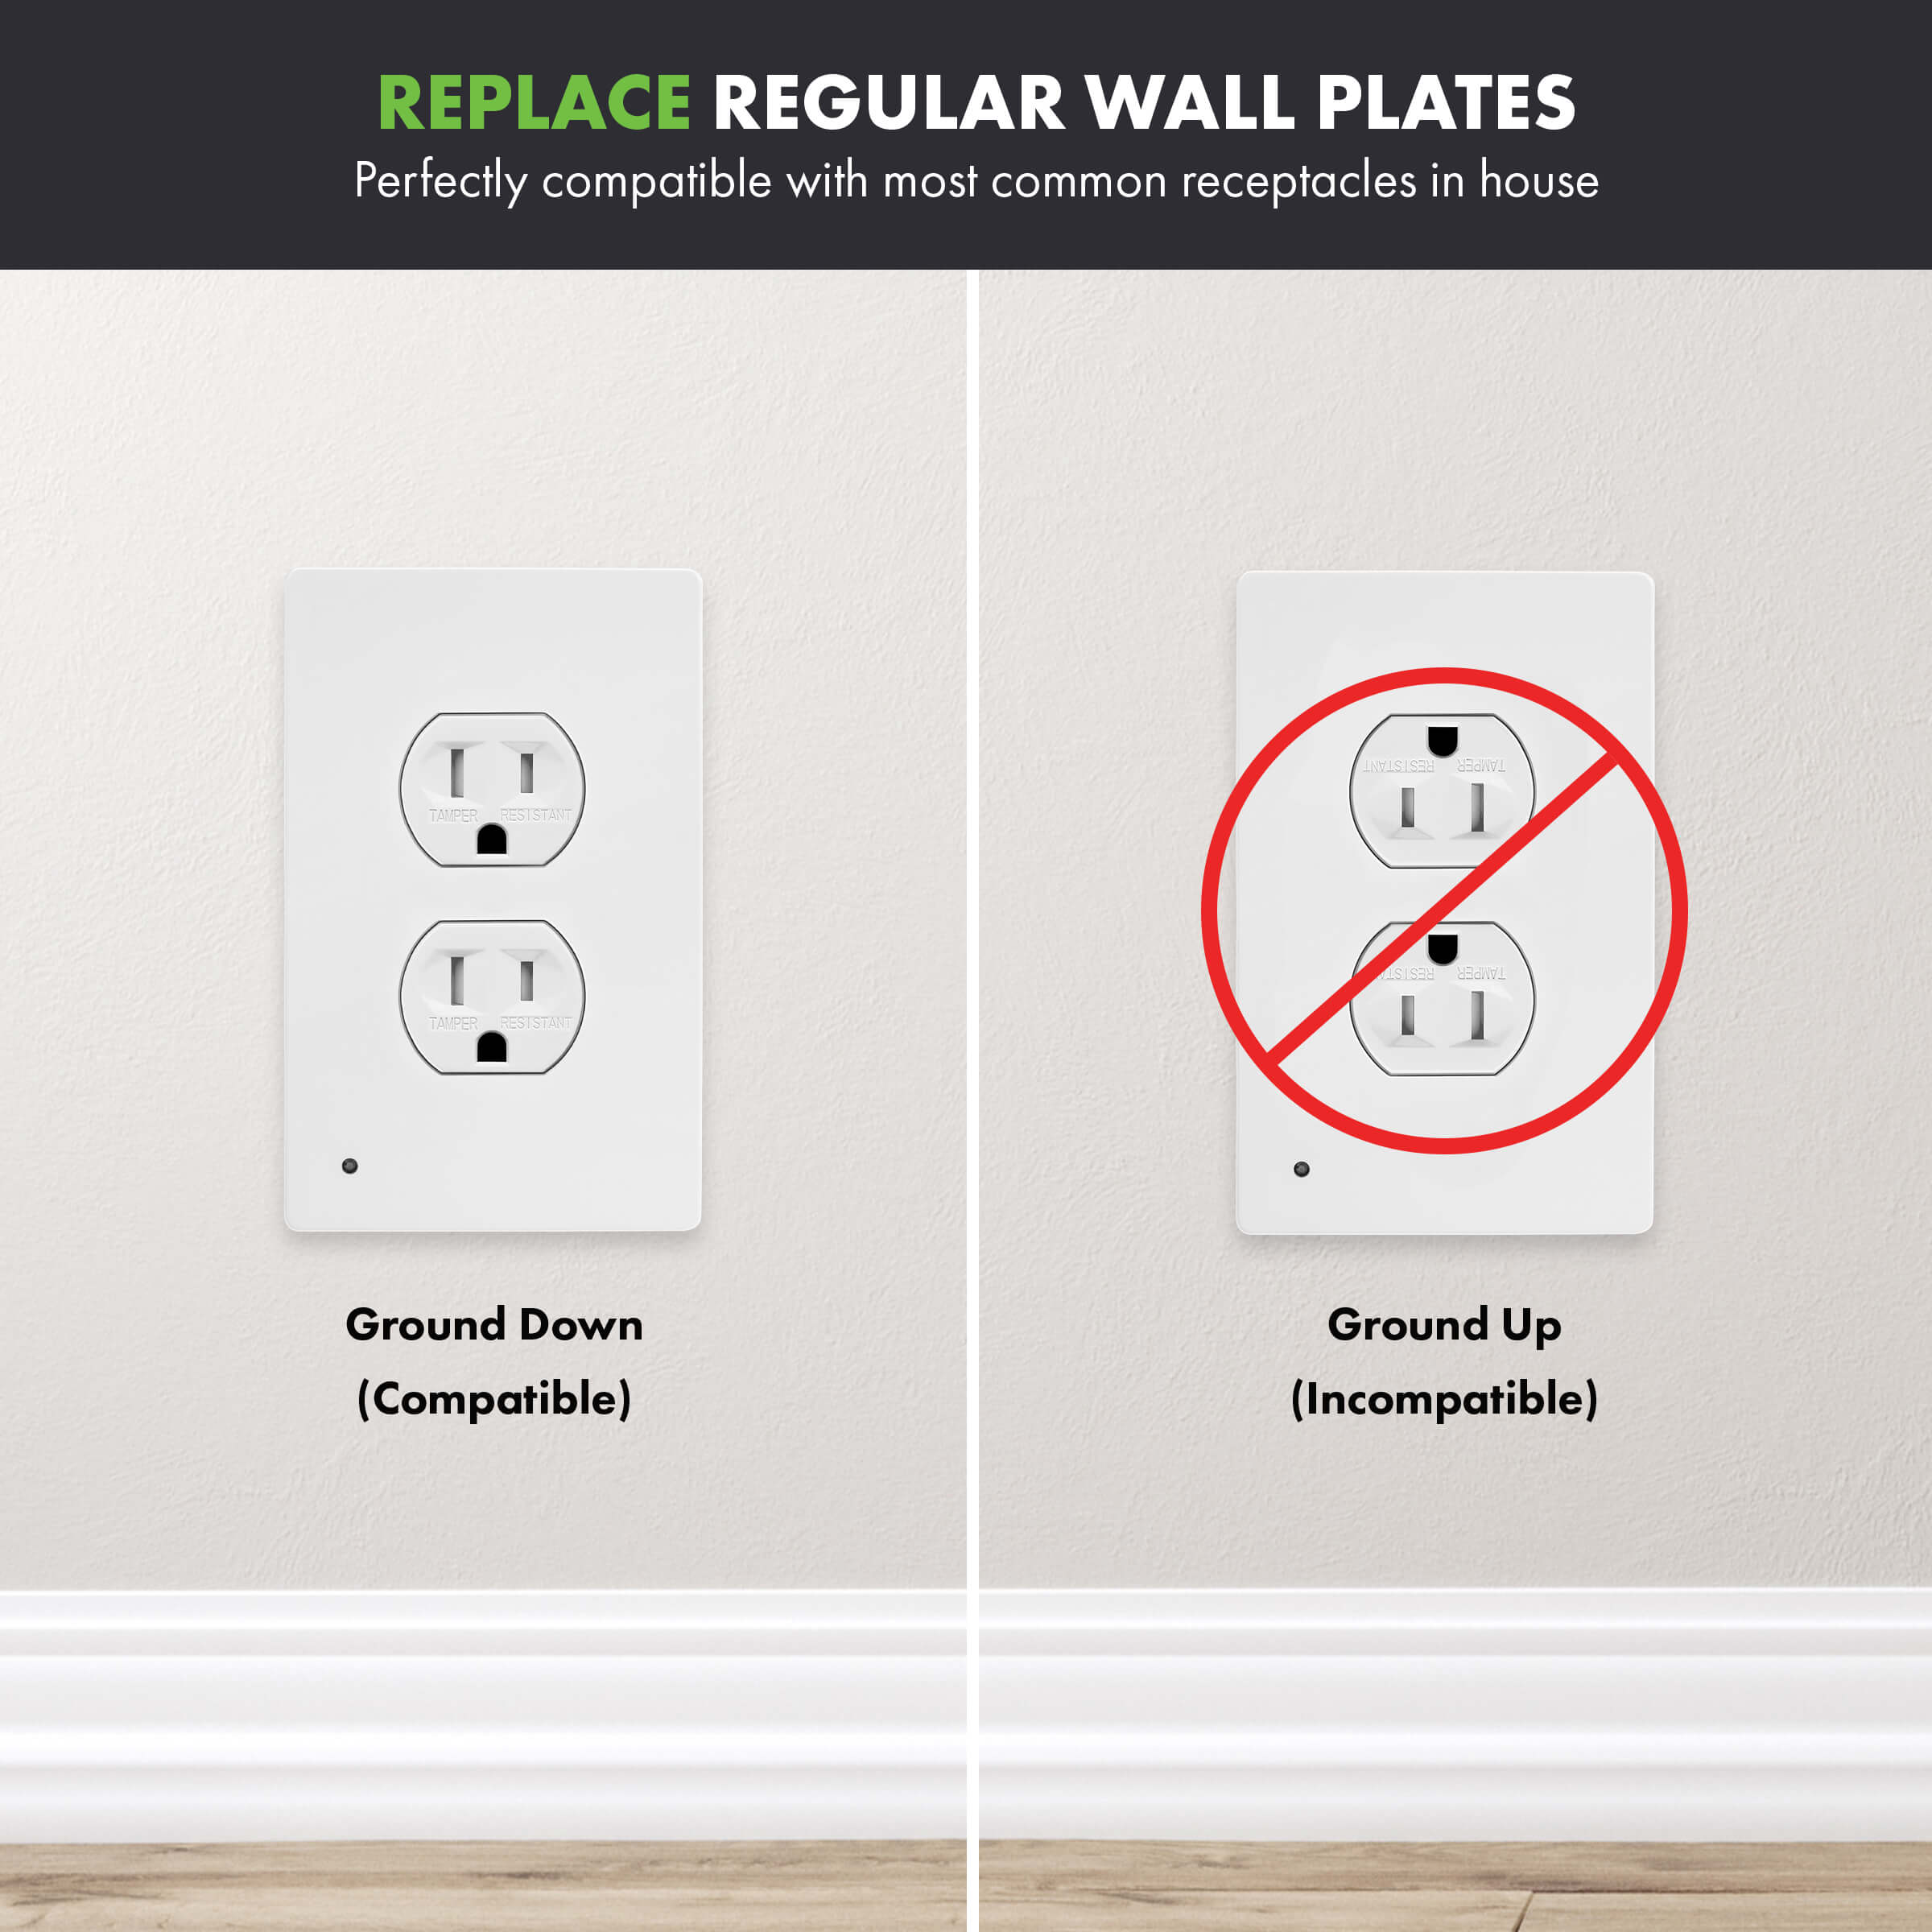 TOPGREENER Guide Light Wall Plate, Screwless Duplex Cover with LED Night Light